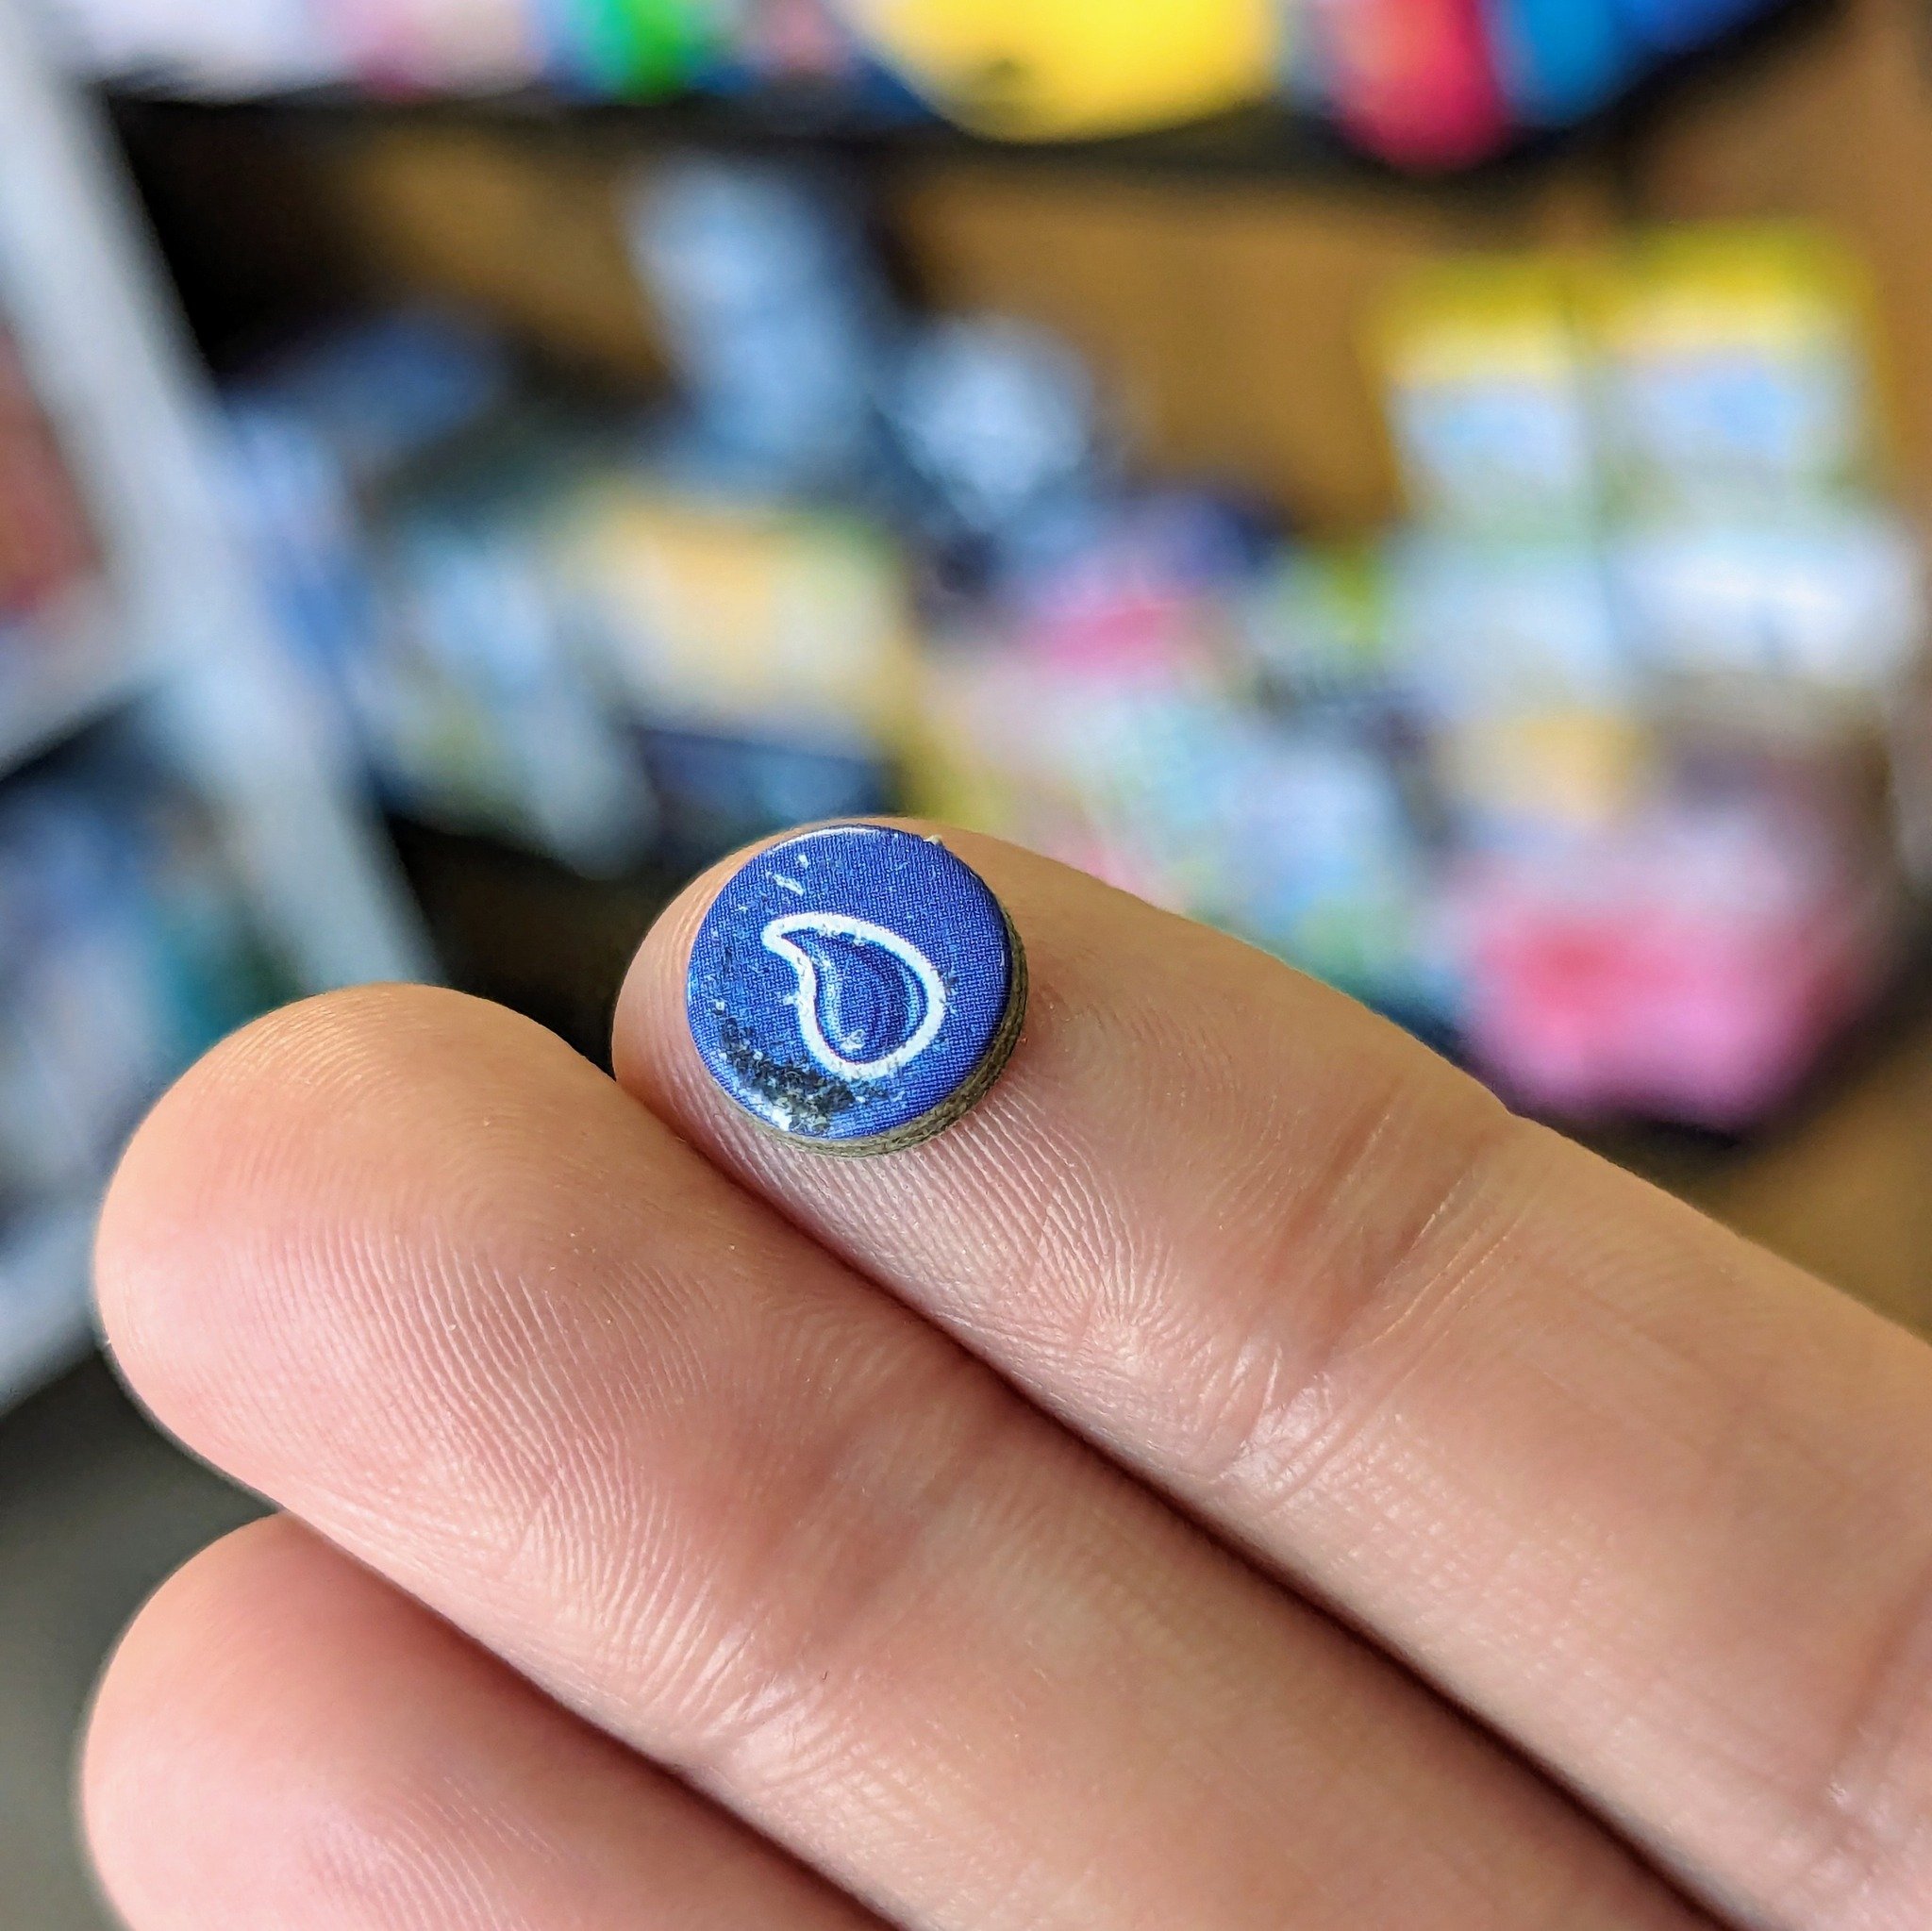 Just for fun: does anyone recognise this tiny token? Which game is it from? Are you smarter than a board game guru? Even Team Shuffle, your friendly local board game geeks, are stumped with this one...! Let us know in the comments below!

#boardgameq